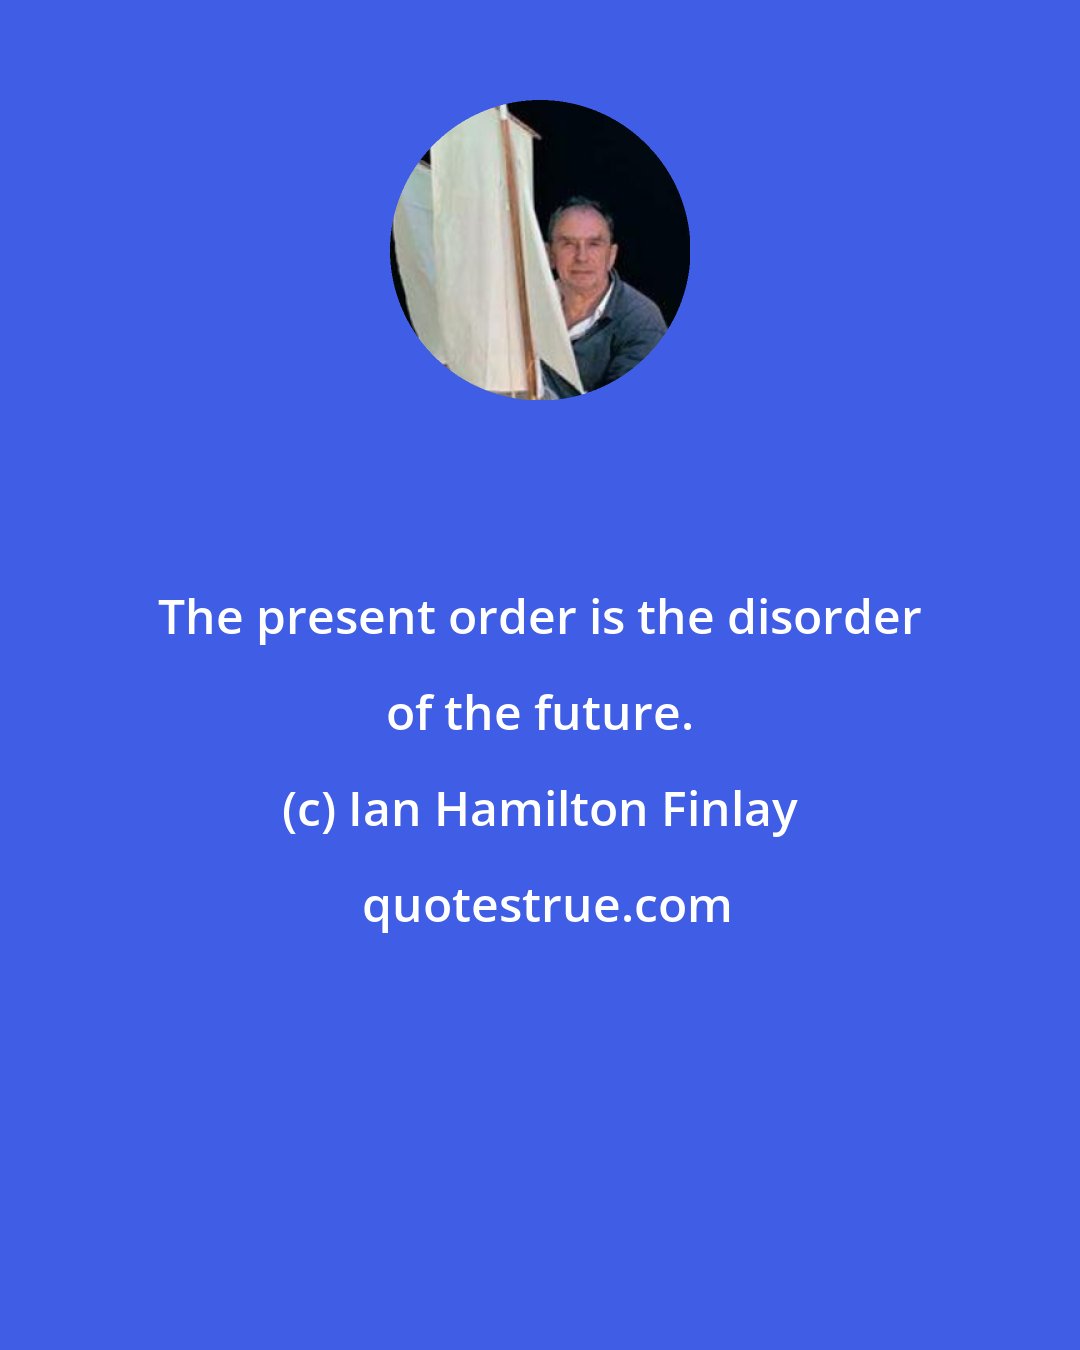 Ian Hamilton Finlay: The present order is the disorder of the future.